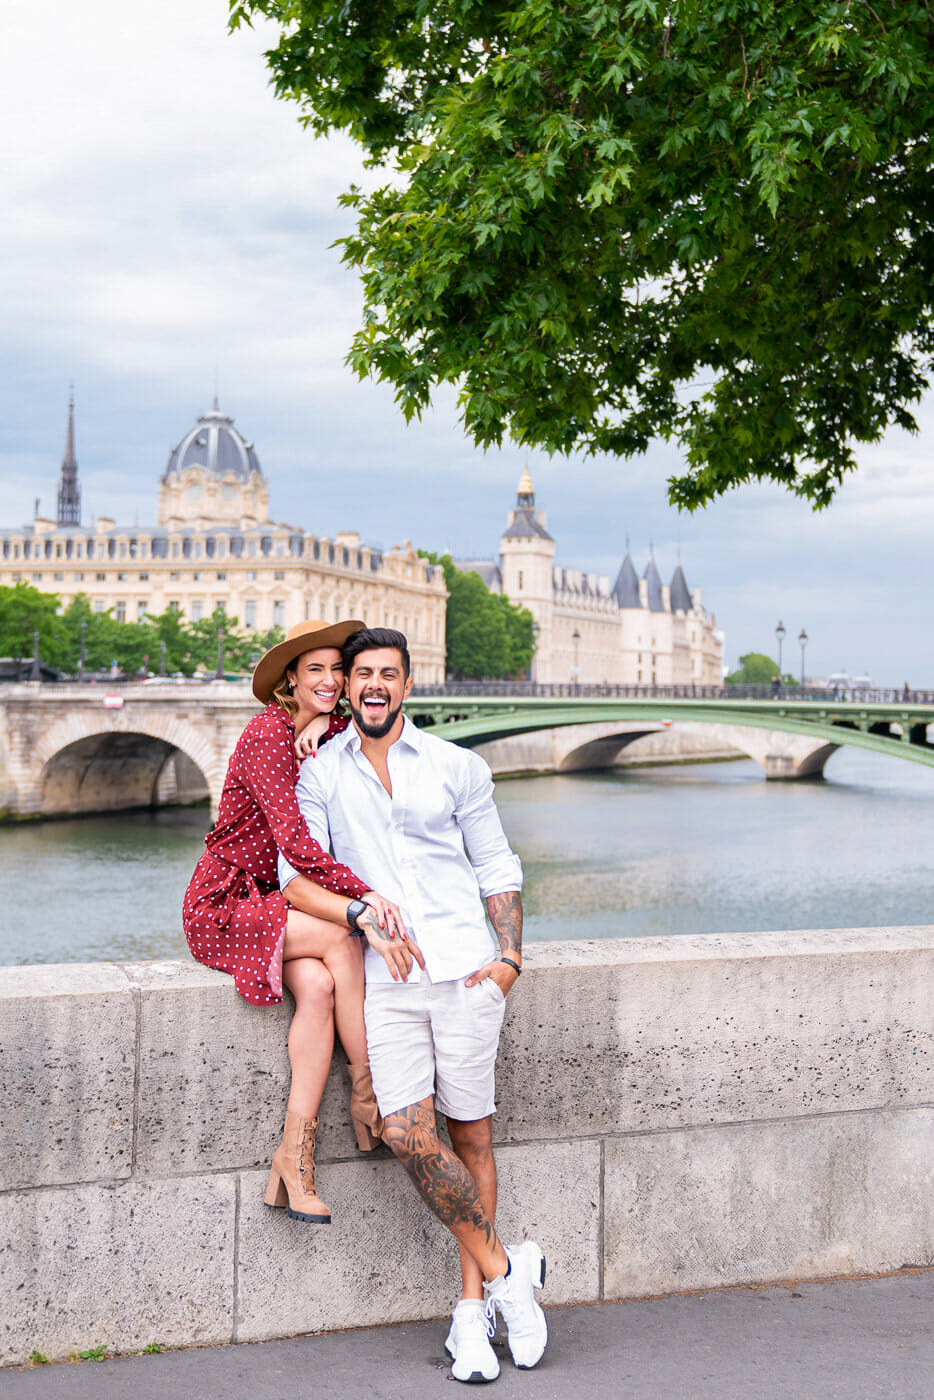 Paris engagement photos locations, outfits, ideas, and props